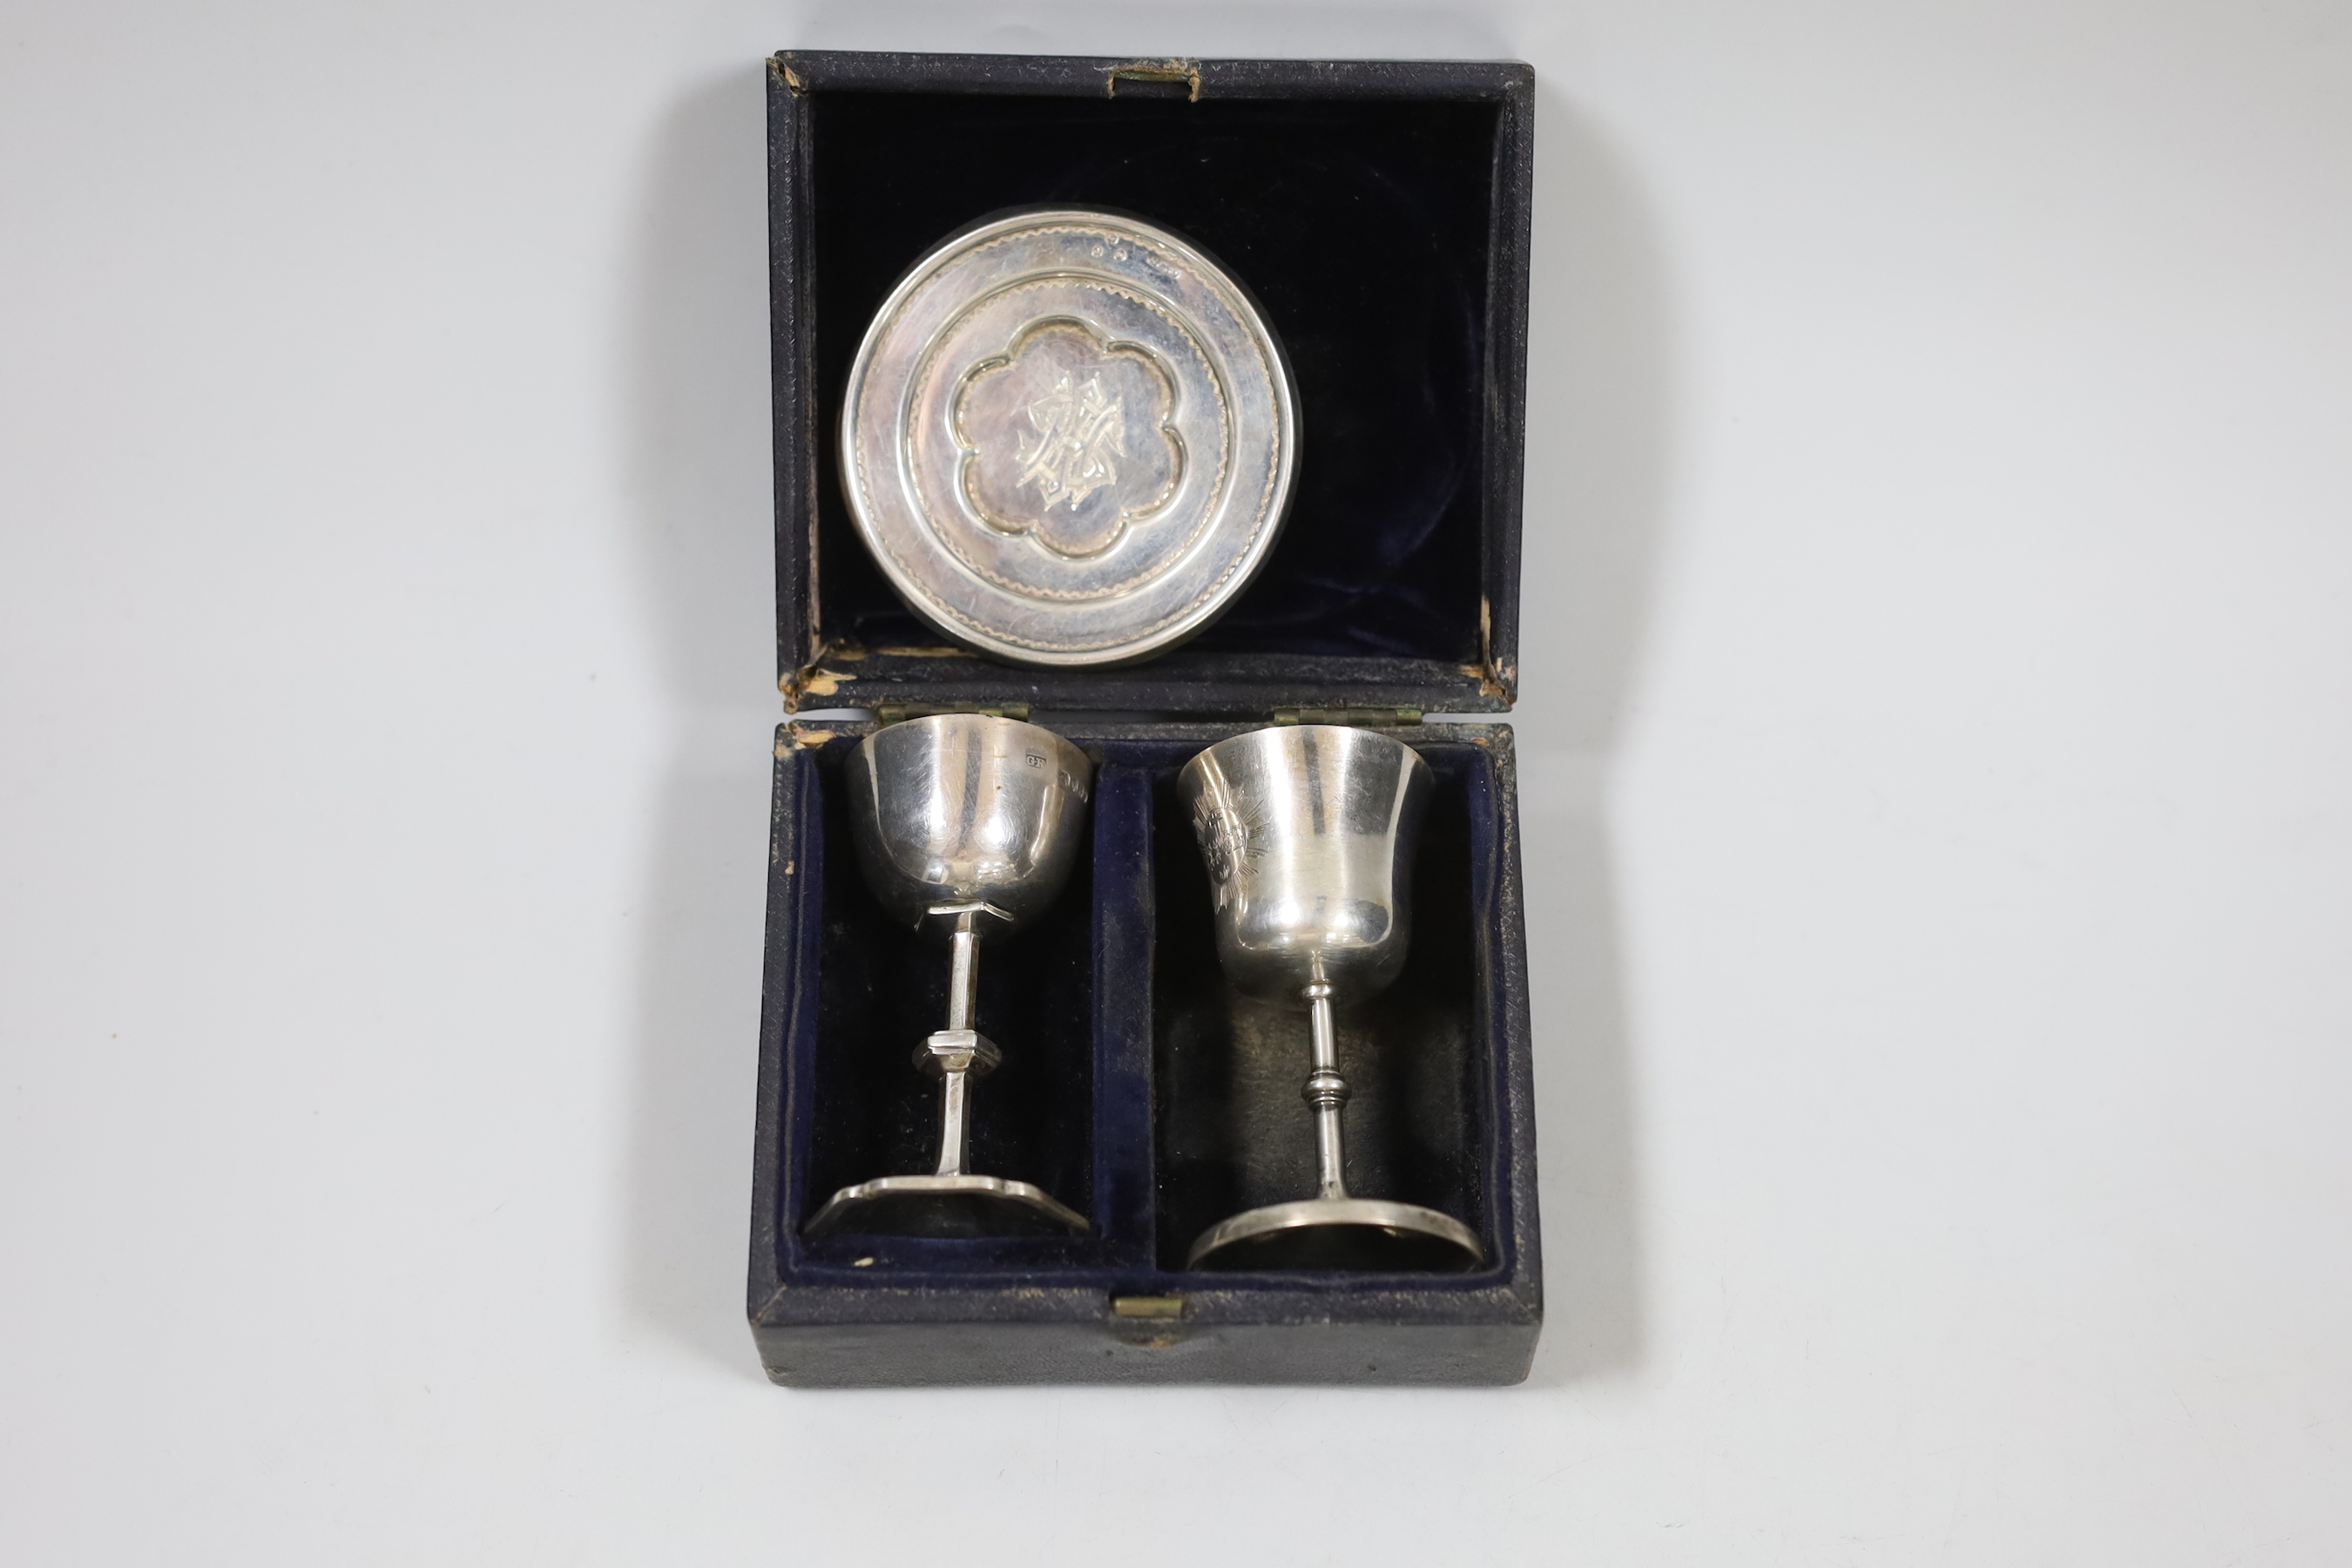 A cased matched Victorian silver travelling communion set, London, 1846, London, 1890 and Birmingham, 1850, tallest piece 78mm.